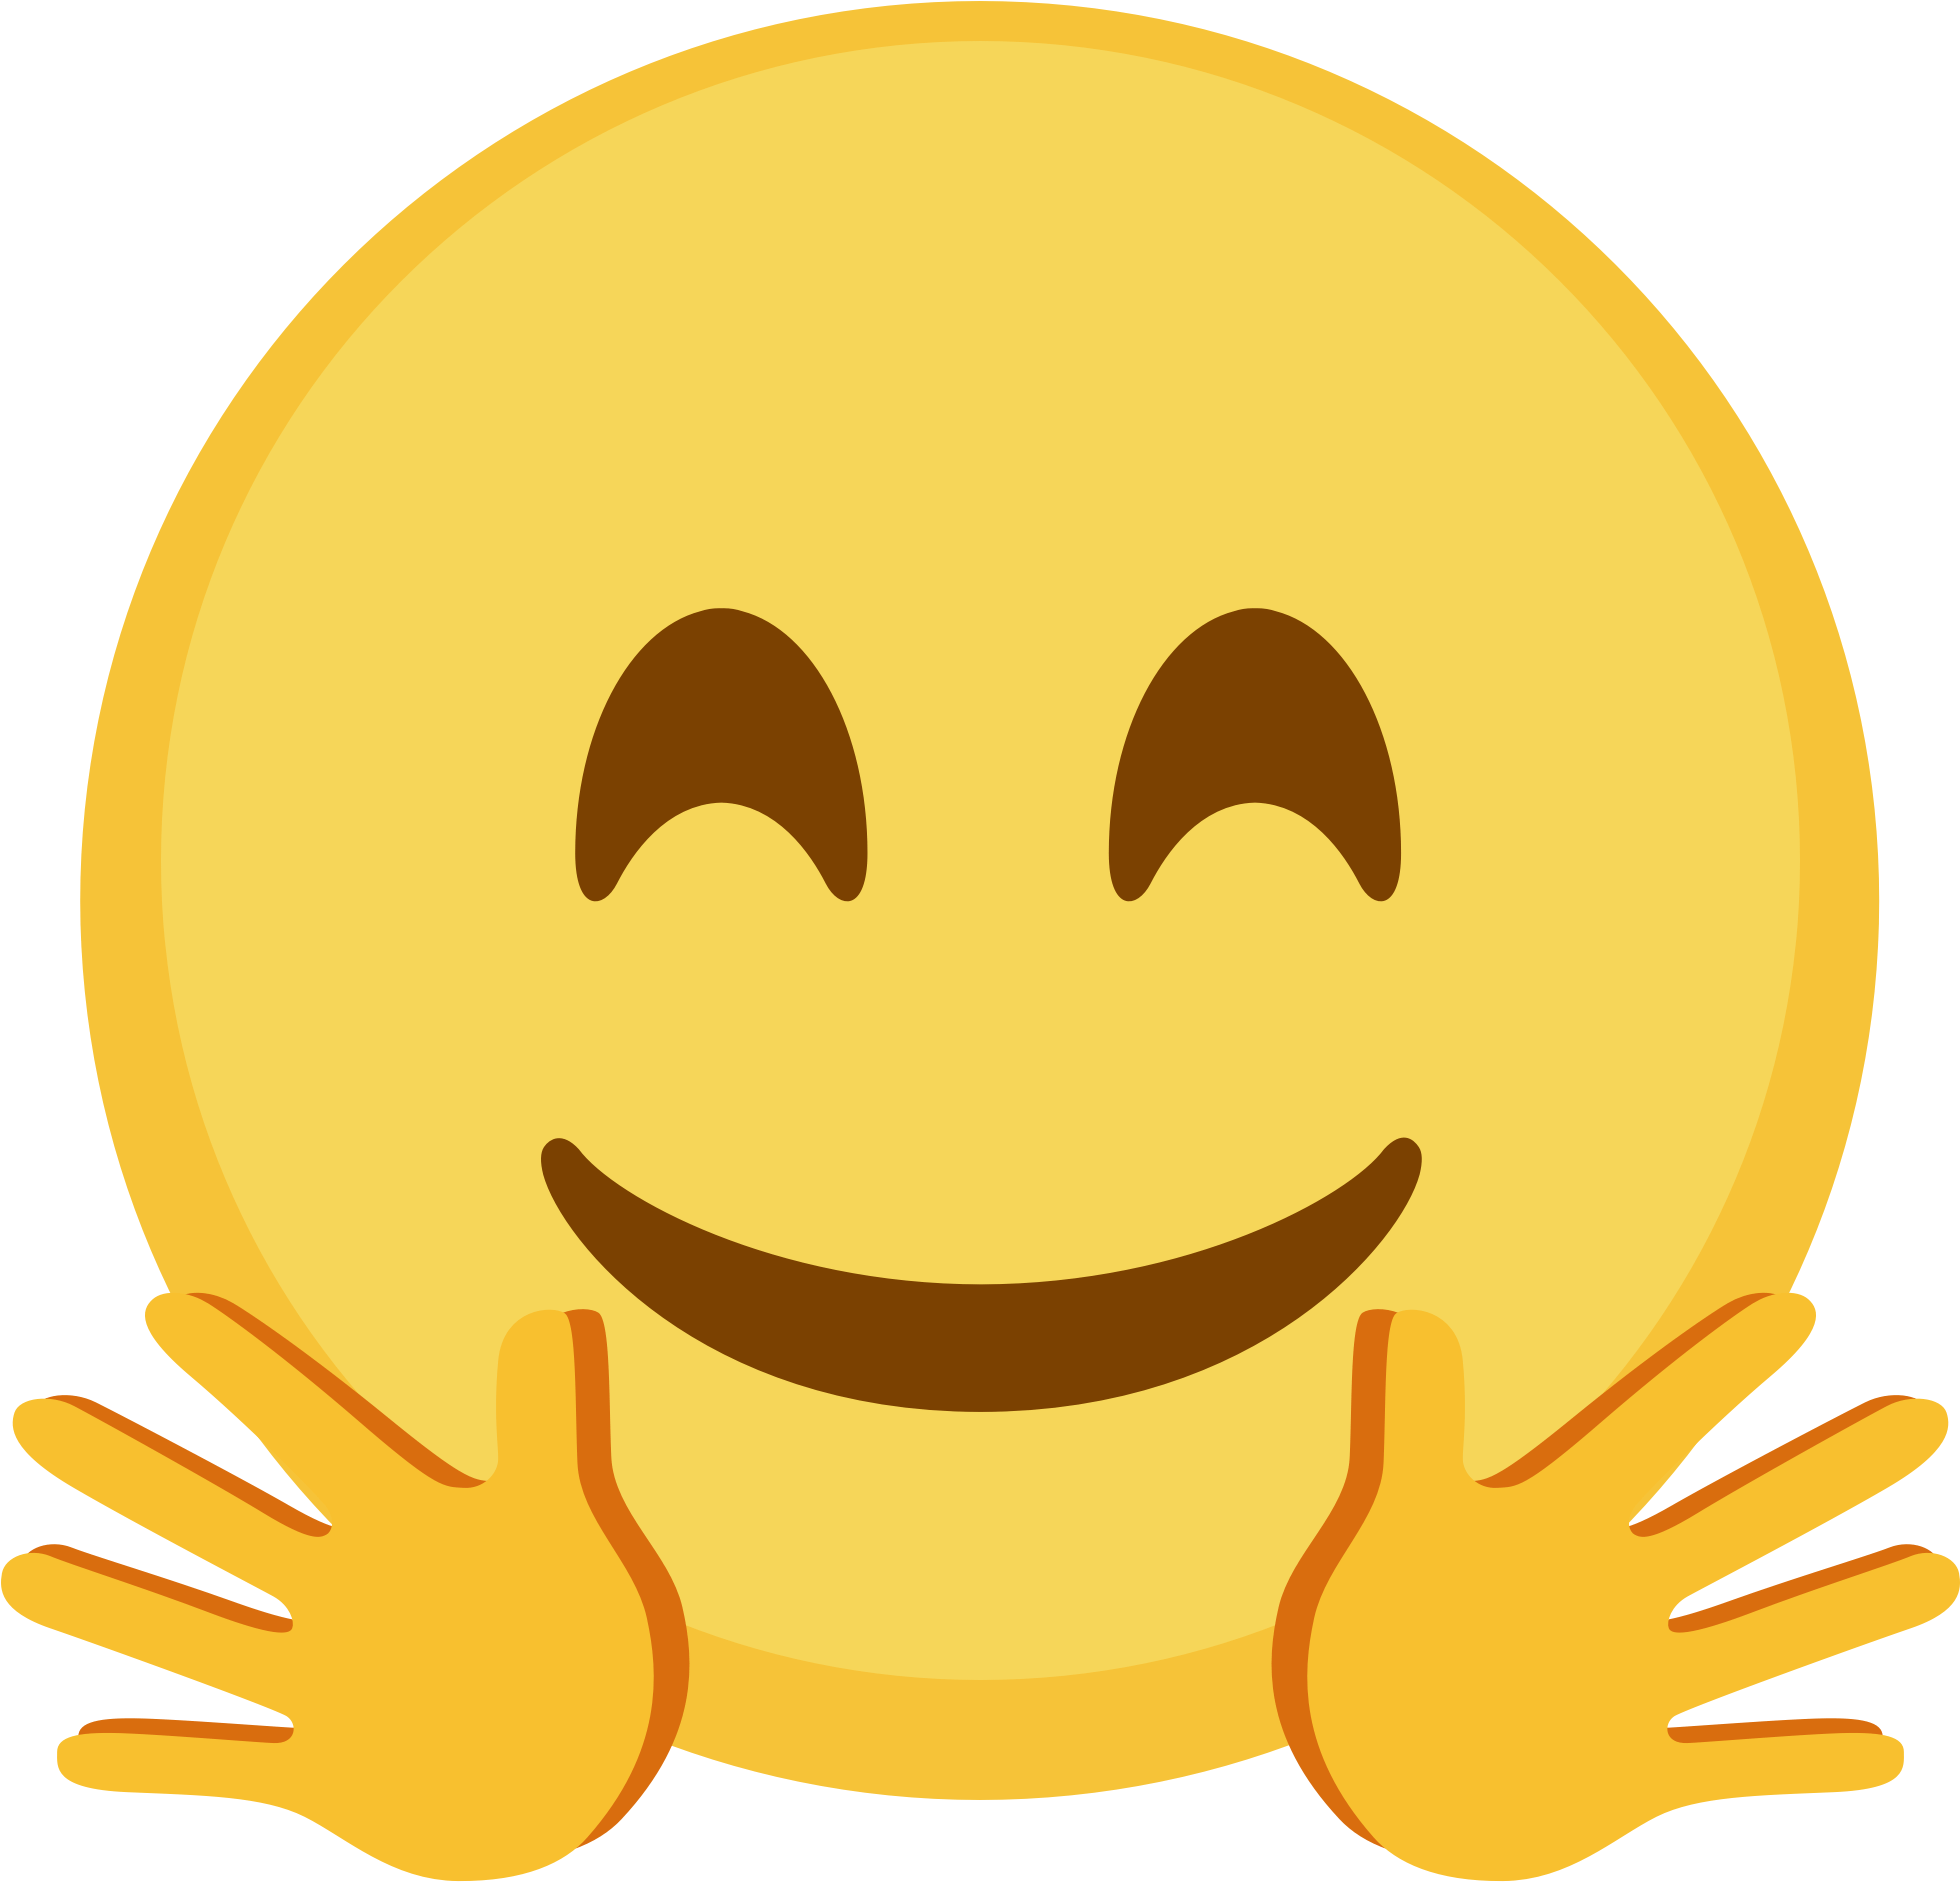 A Yellow Smiley Face With Hands